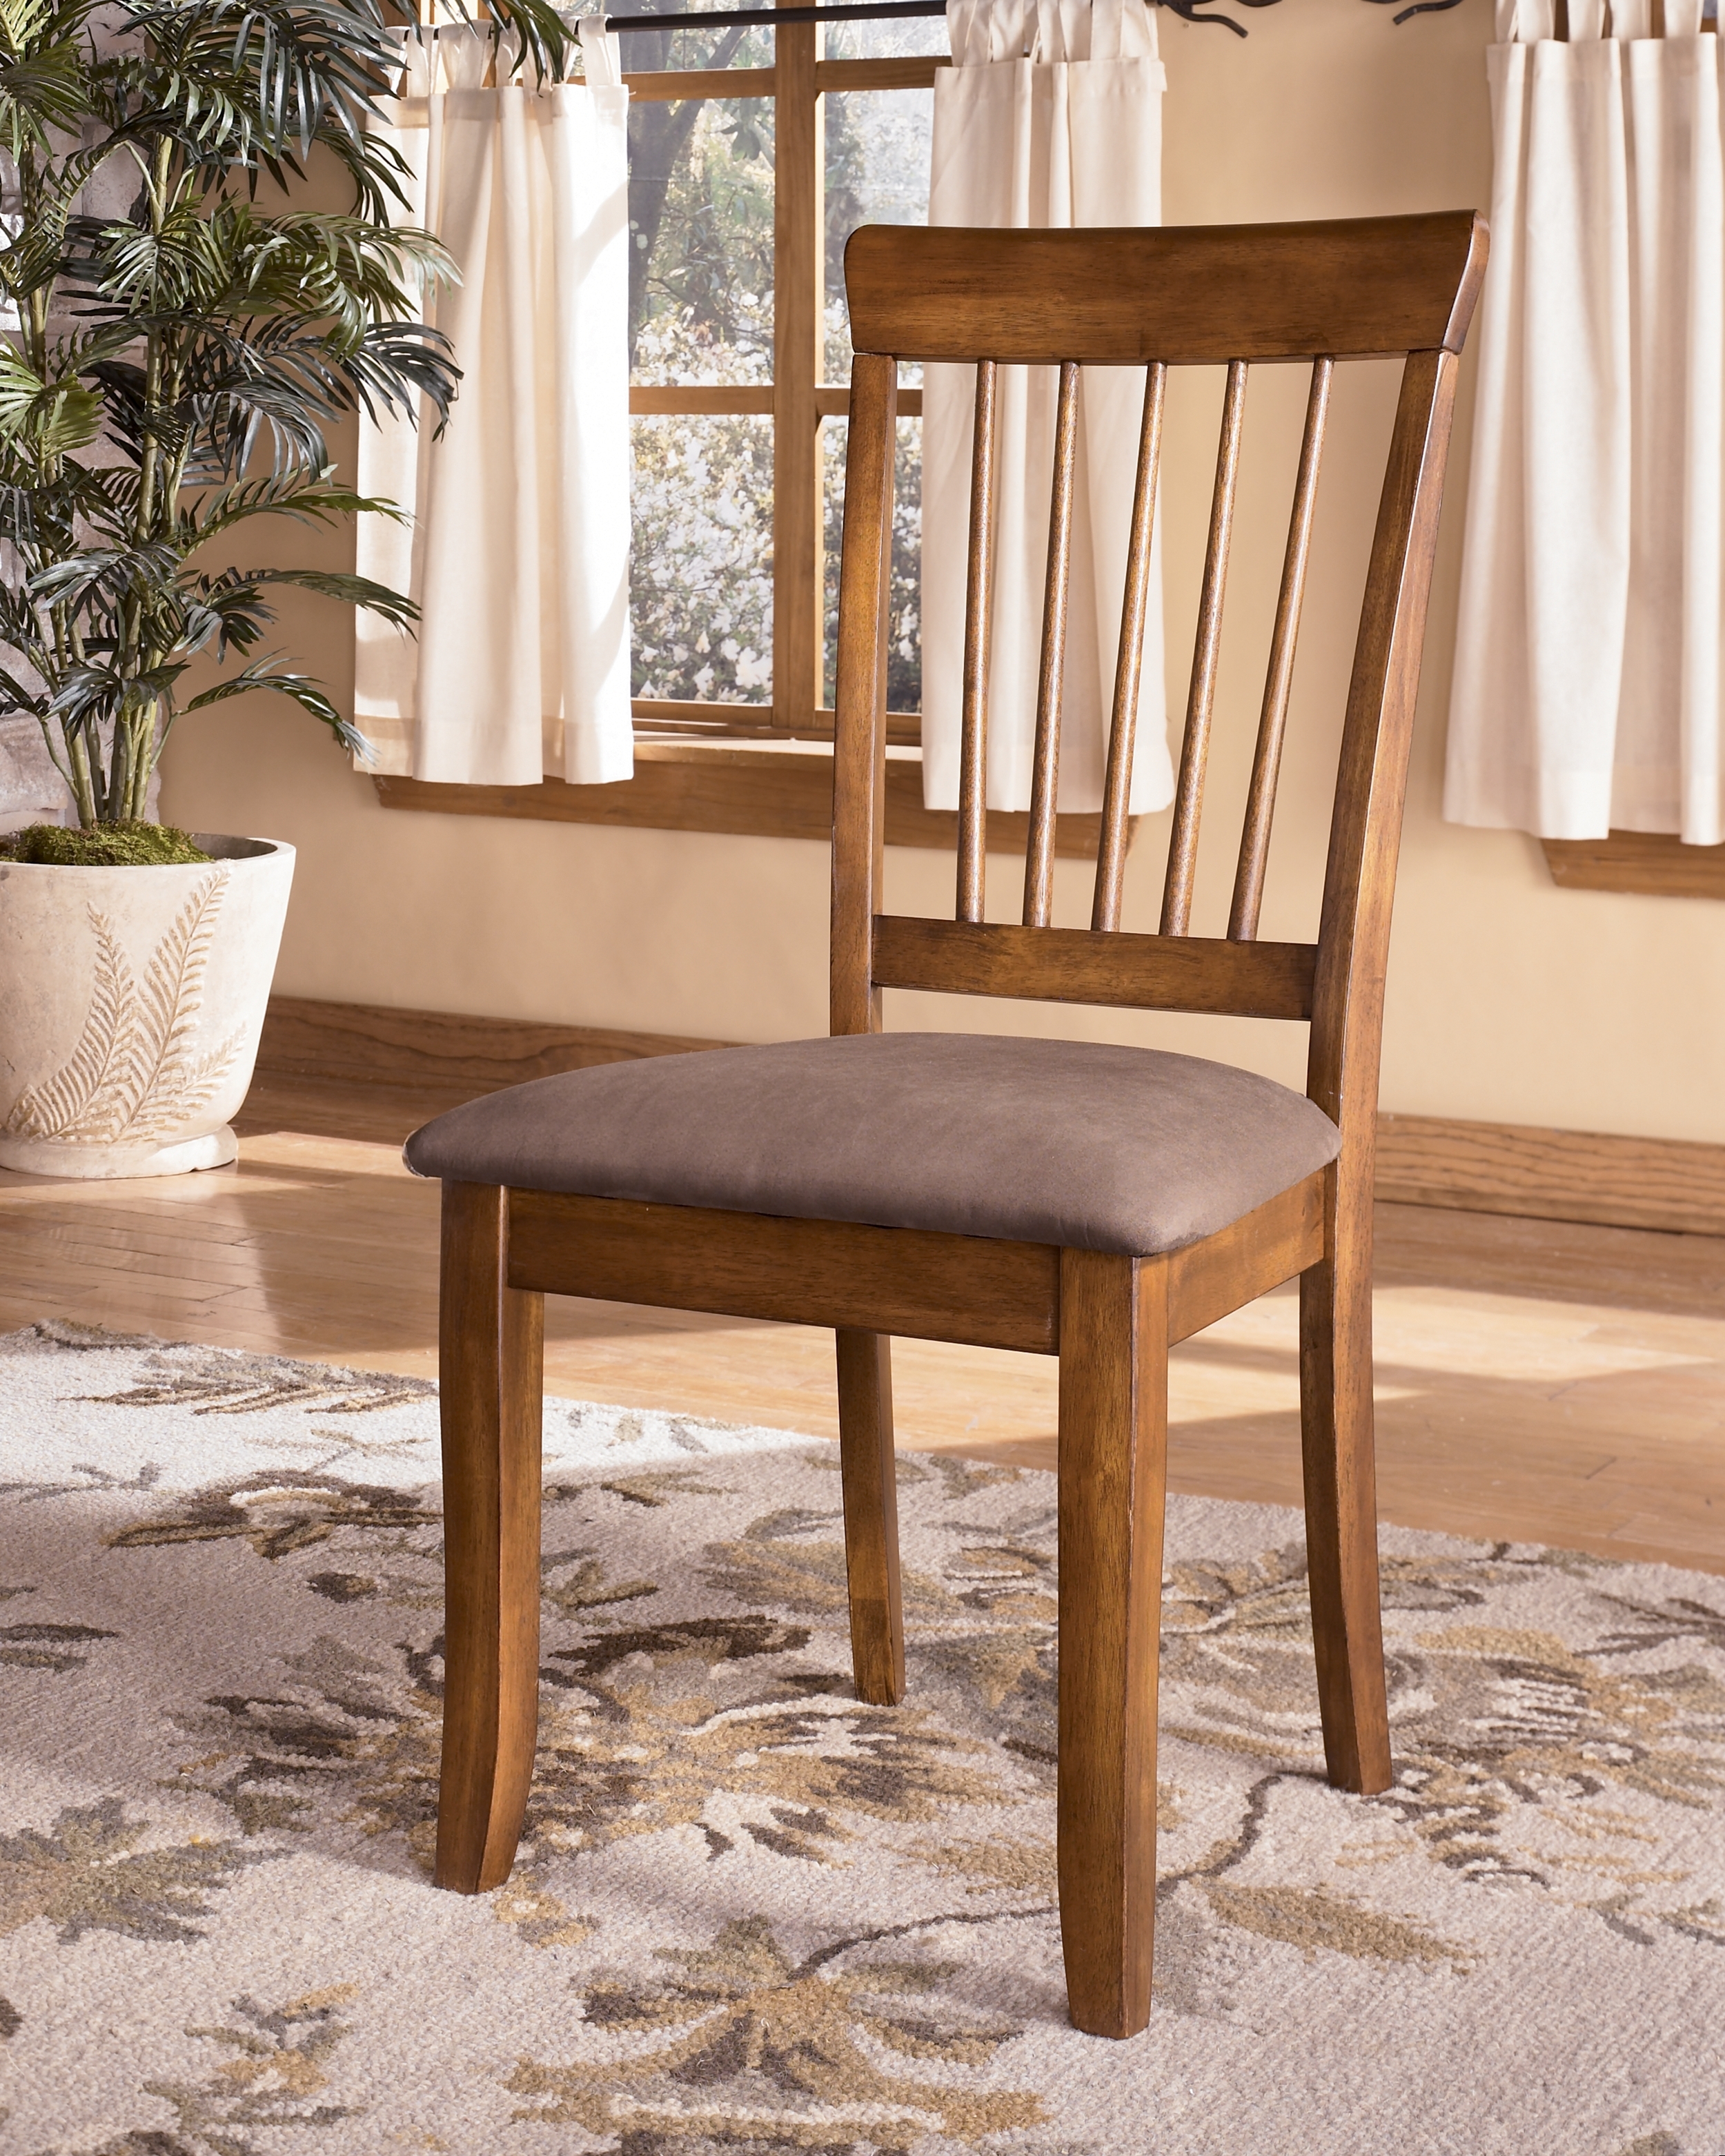 Dining chairs usa